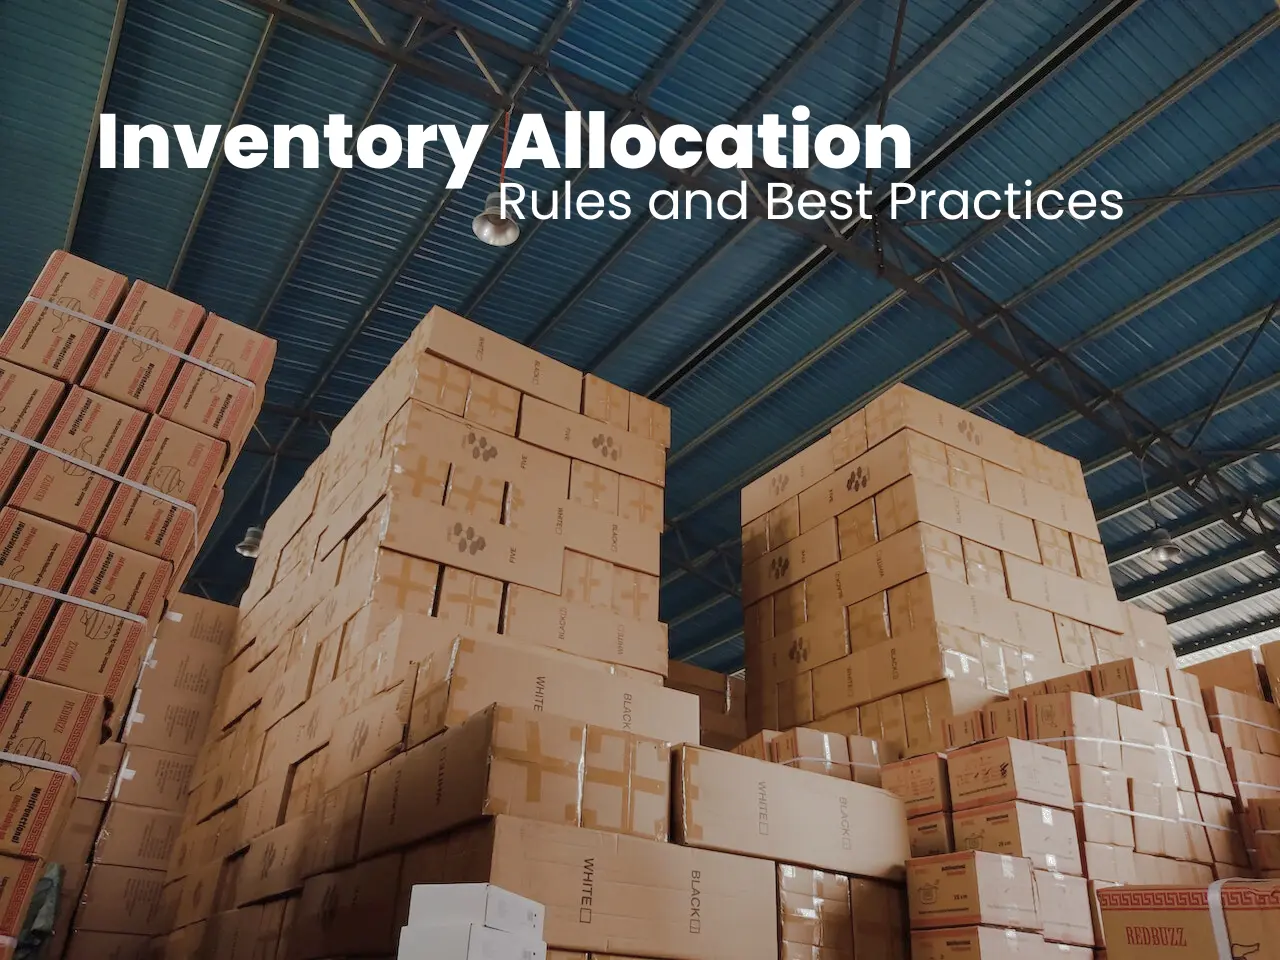 Inventory Allocation Rules and Best Practices